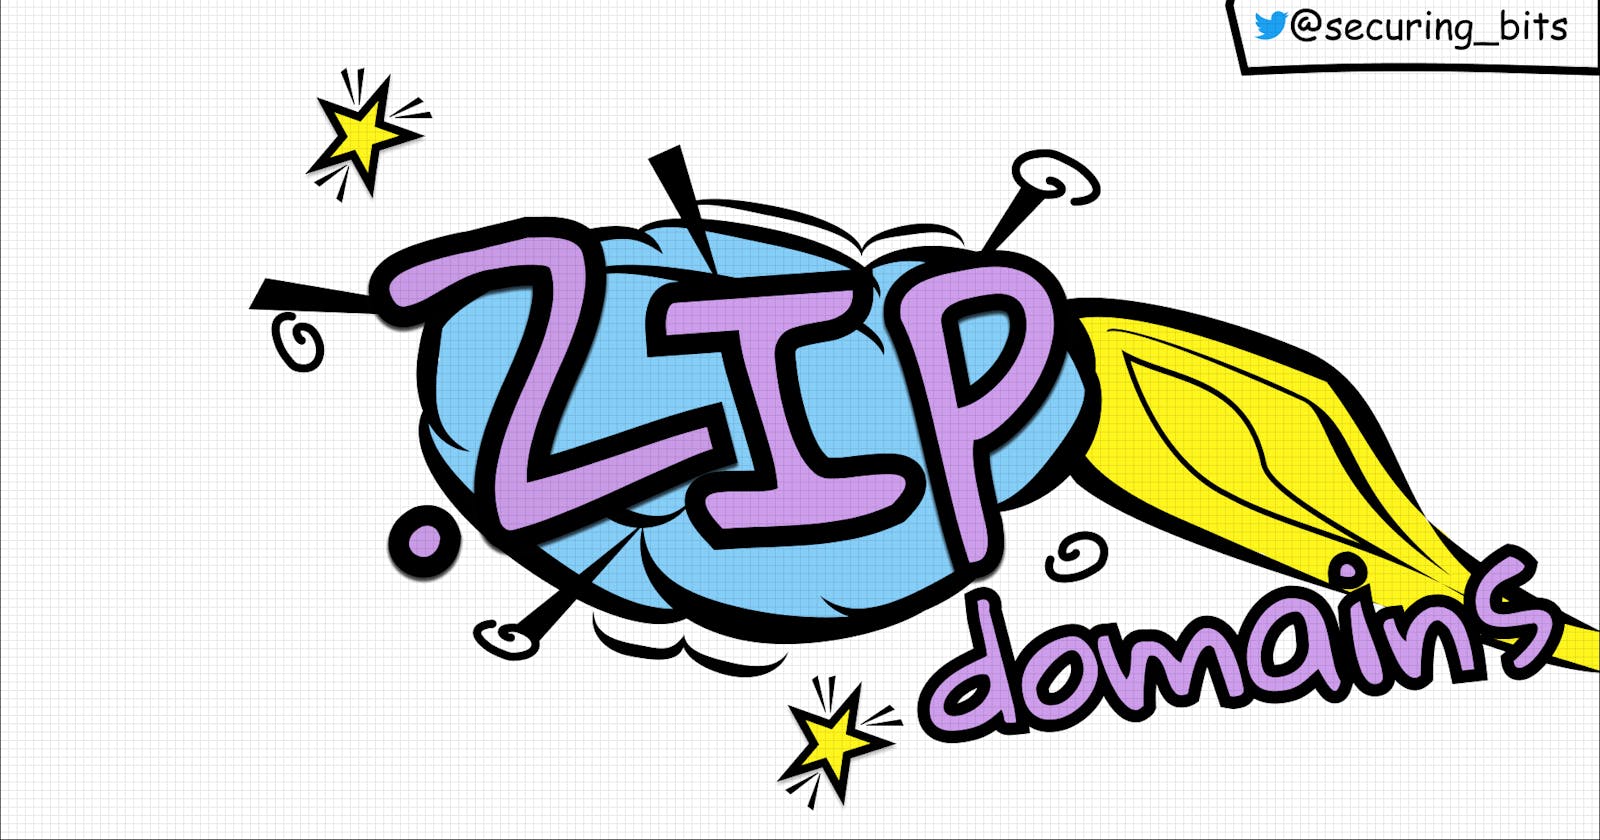 .ZIP Domains - A Faster Way for Serving Malware